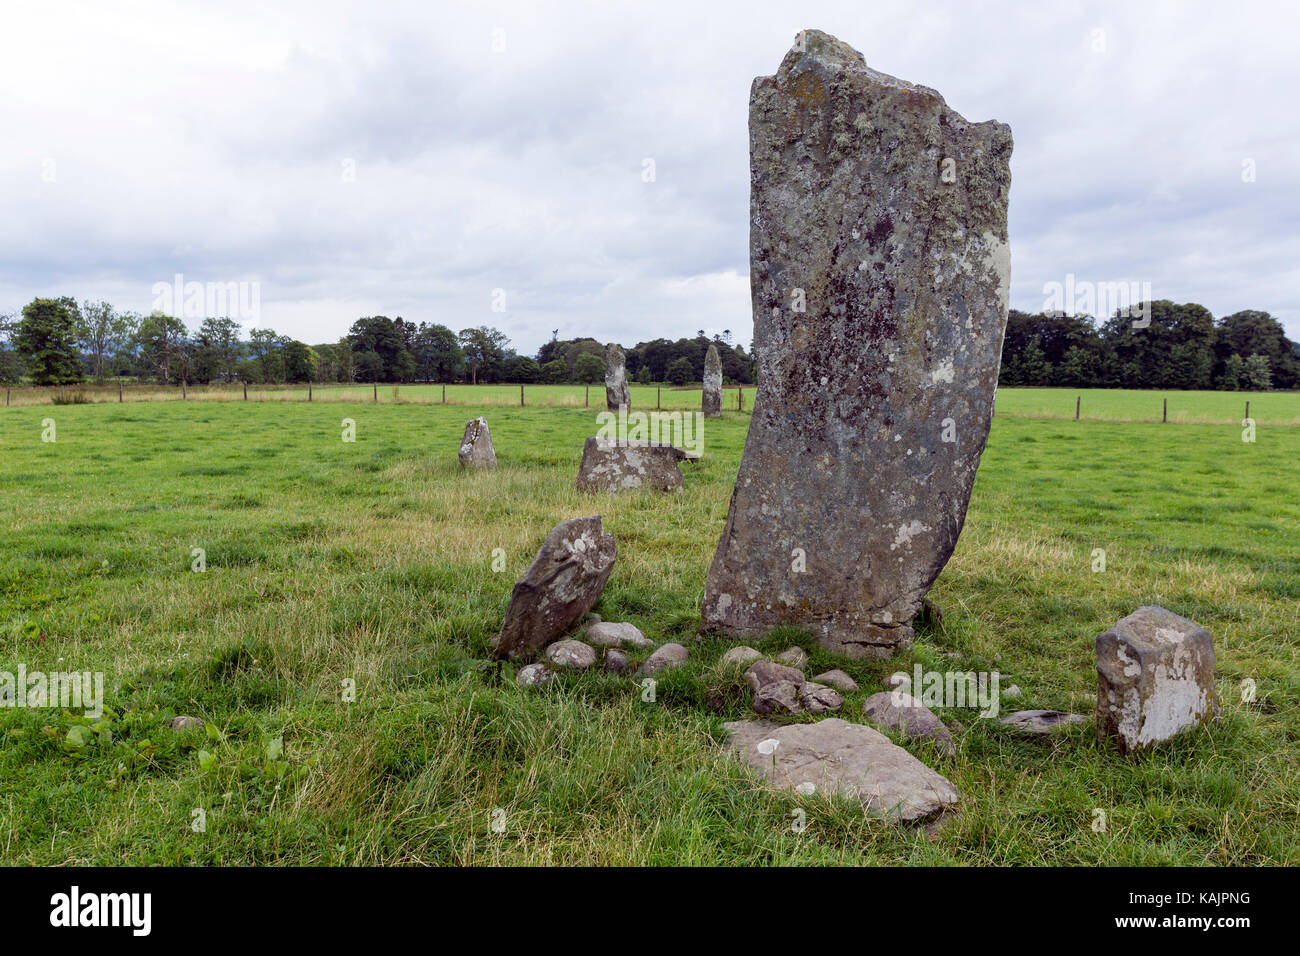 Nether largie standing stones, Kilmartin, Argyll and bute, Ecosse, Royaume-Uni Banque D'Images